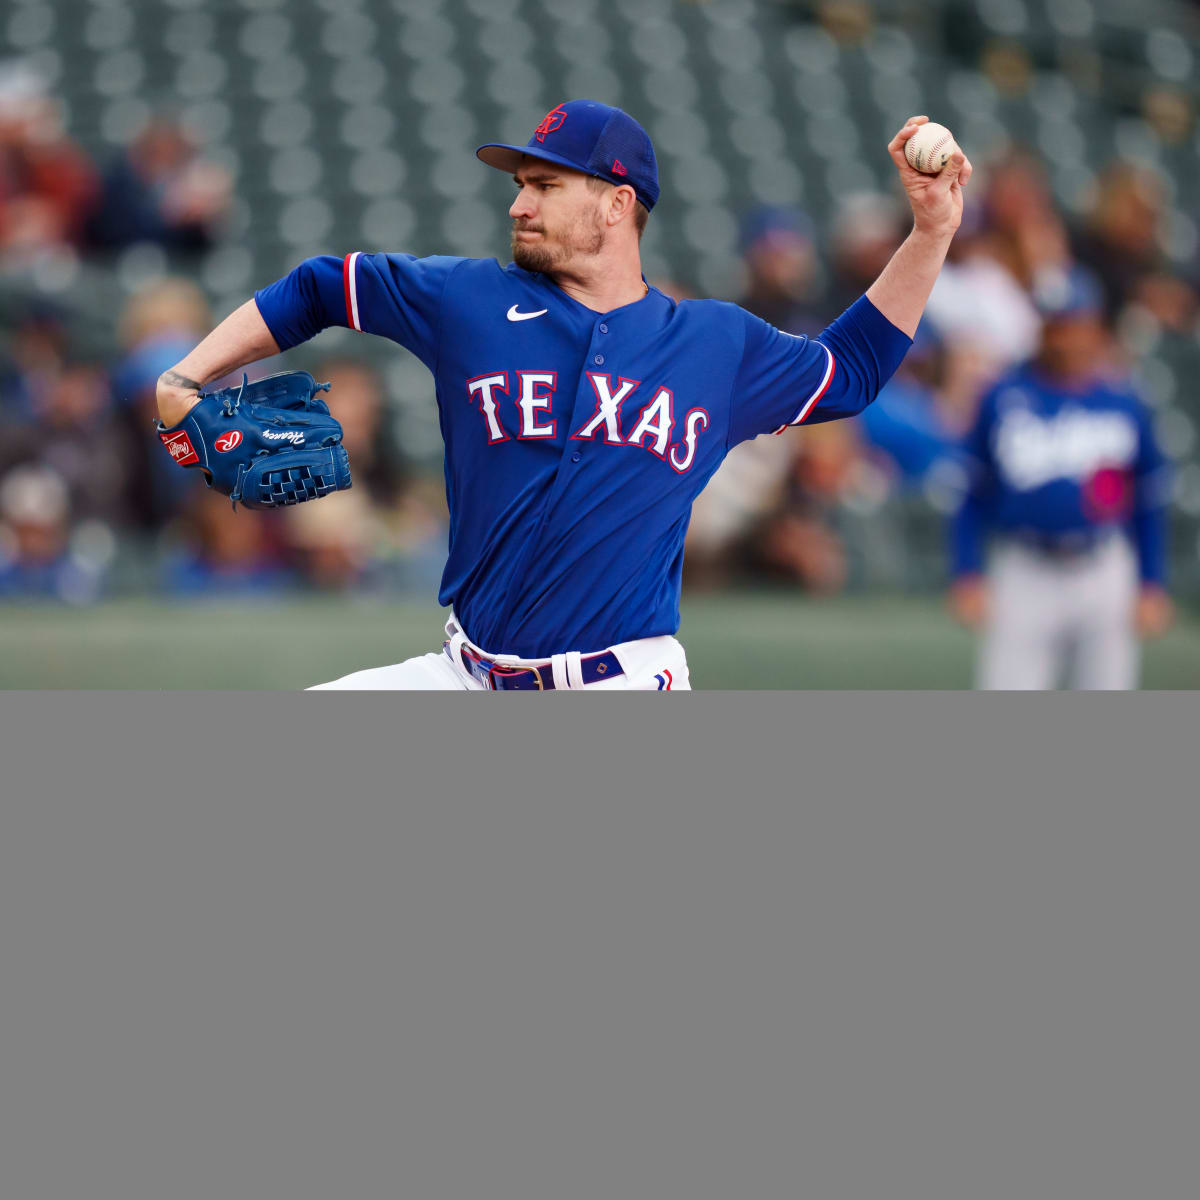 Previewing the Texas Rangers versus the Oakland Athletics weekend